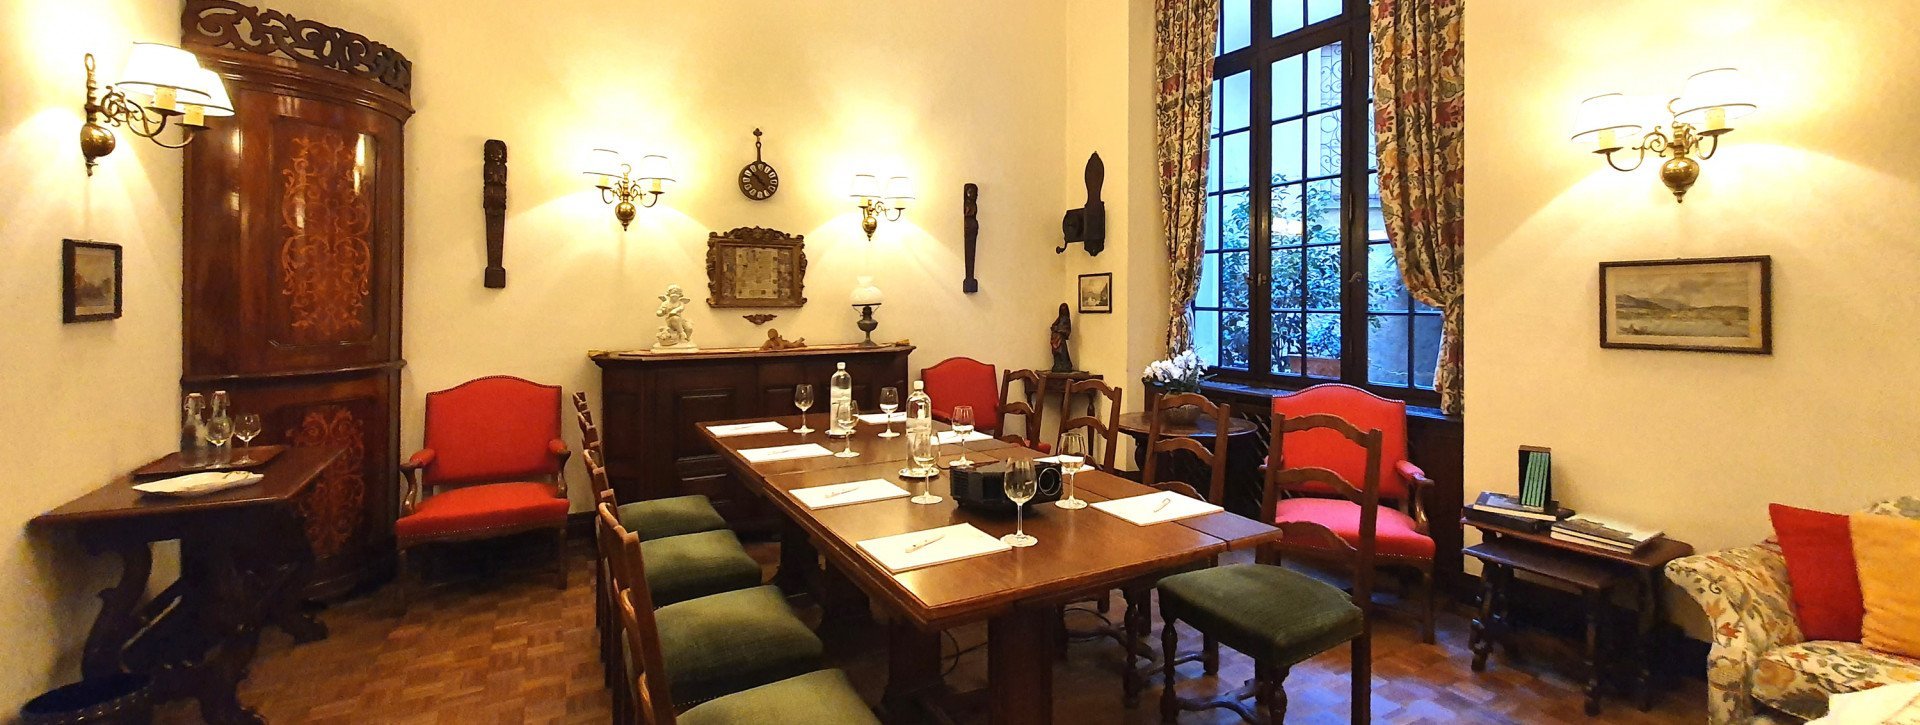 Meeting room 'Taverna degli Angeli' for events up to 8 people in an elegant and traditional style in the centre of Lugano